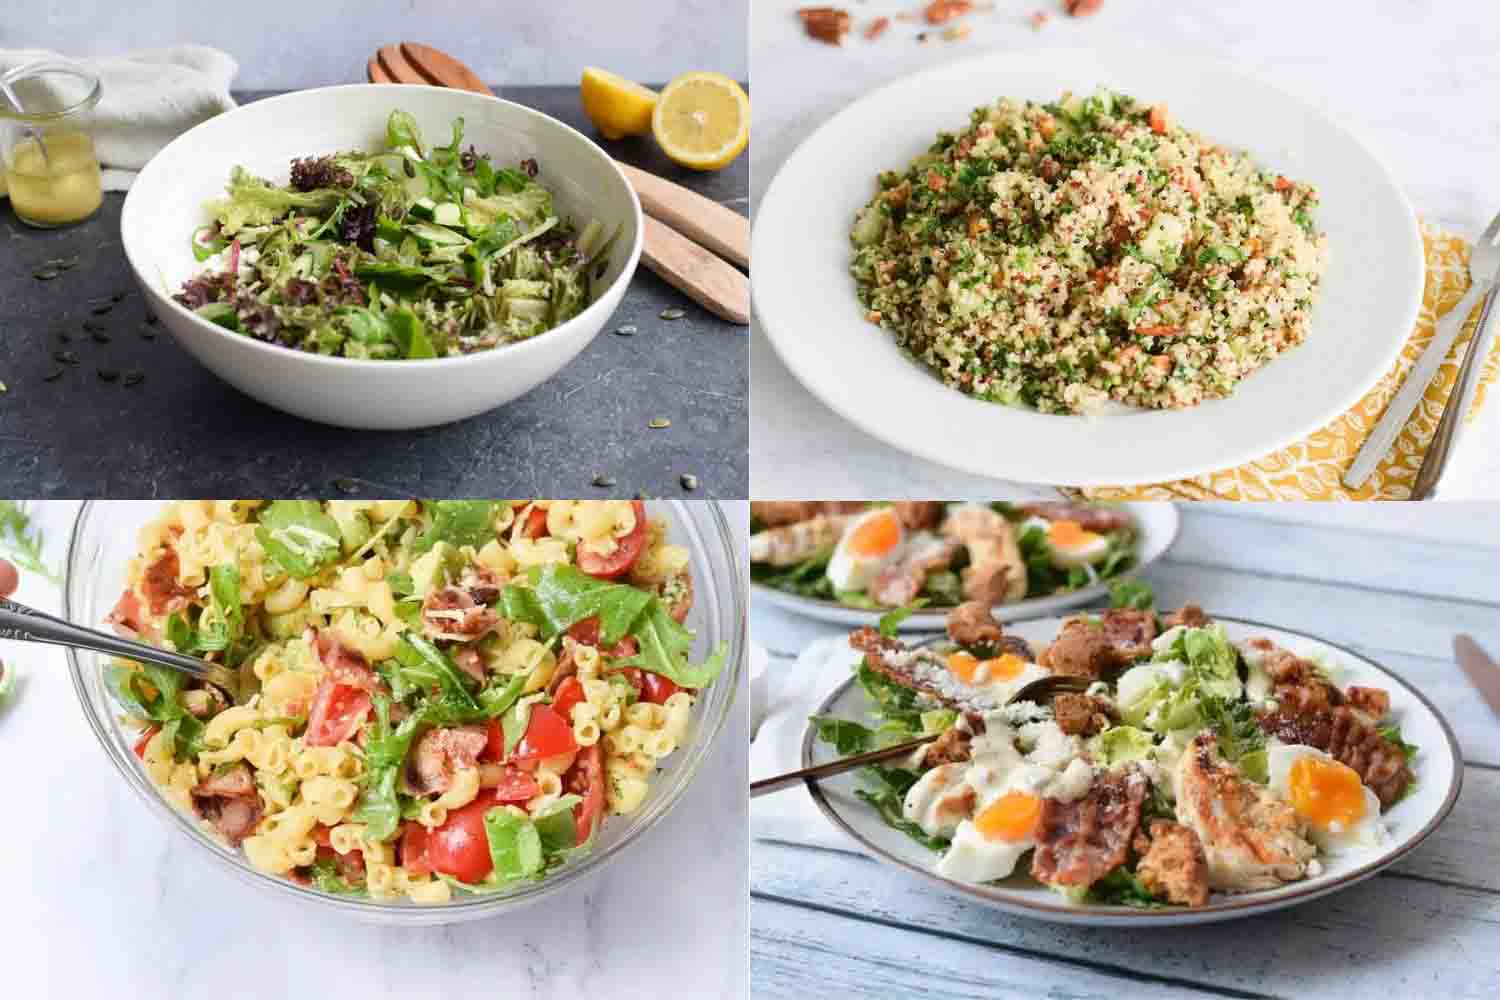 Four low FODMAP salads together on a picture